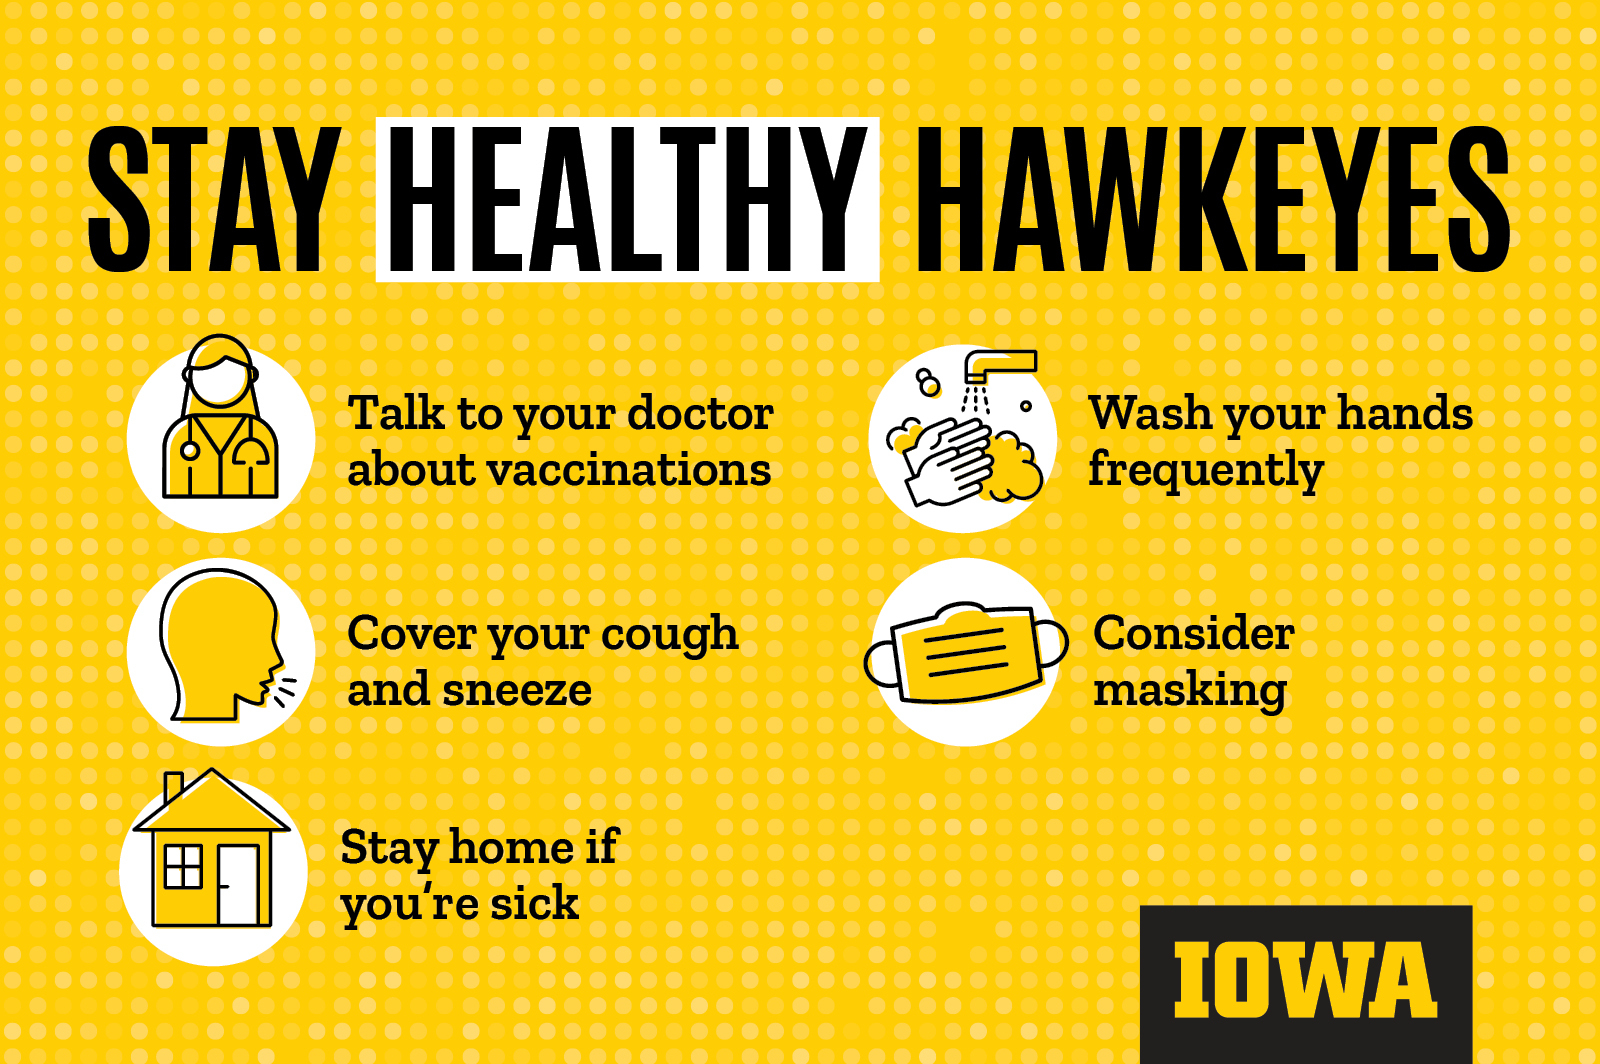 Stay Healthy - Stay Home if Sick, Cover Cough and Sneeze, Wash Hands Frequently, Consider Masking, Talk to Doc about Vaccinations